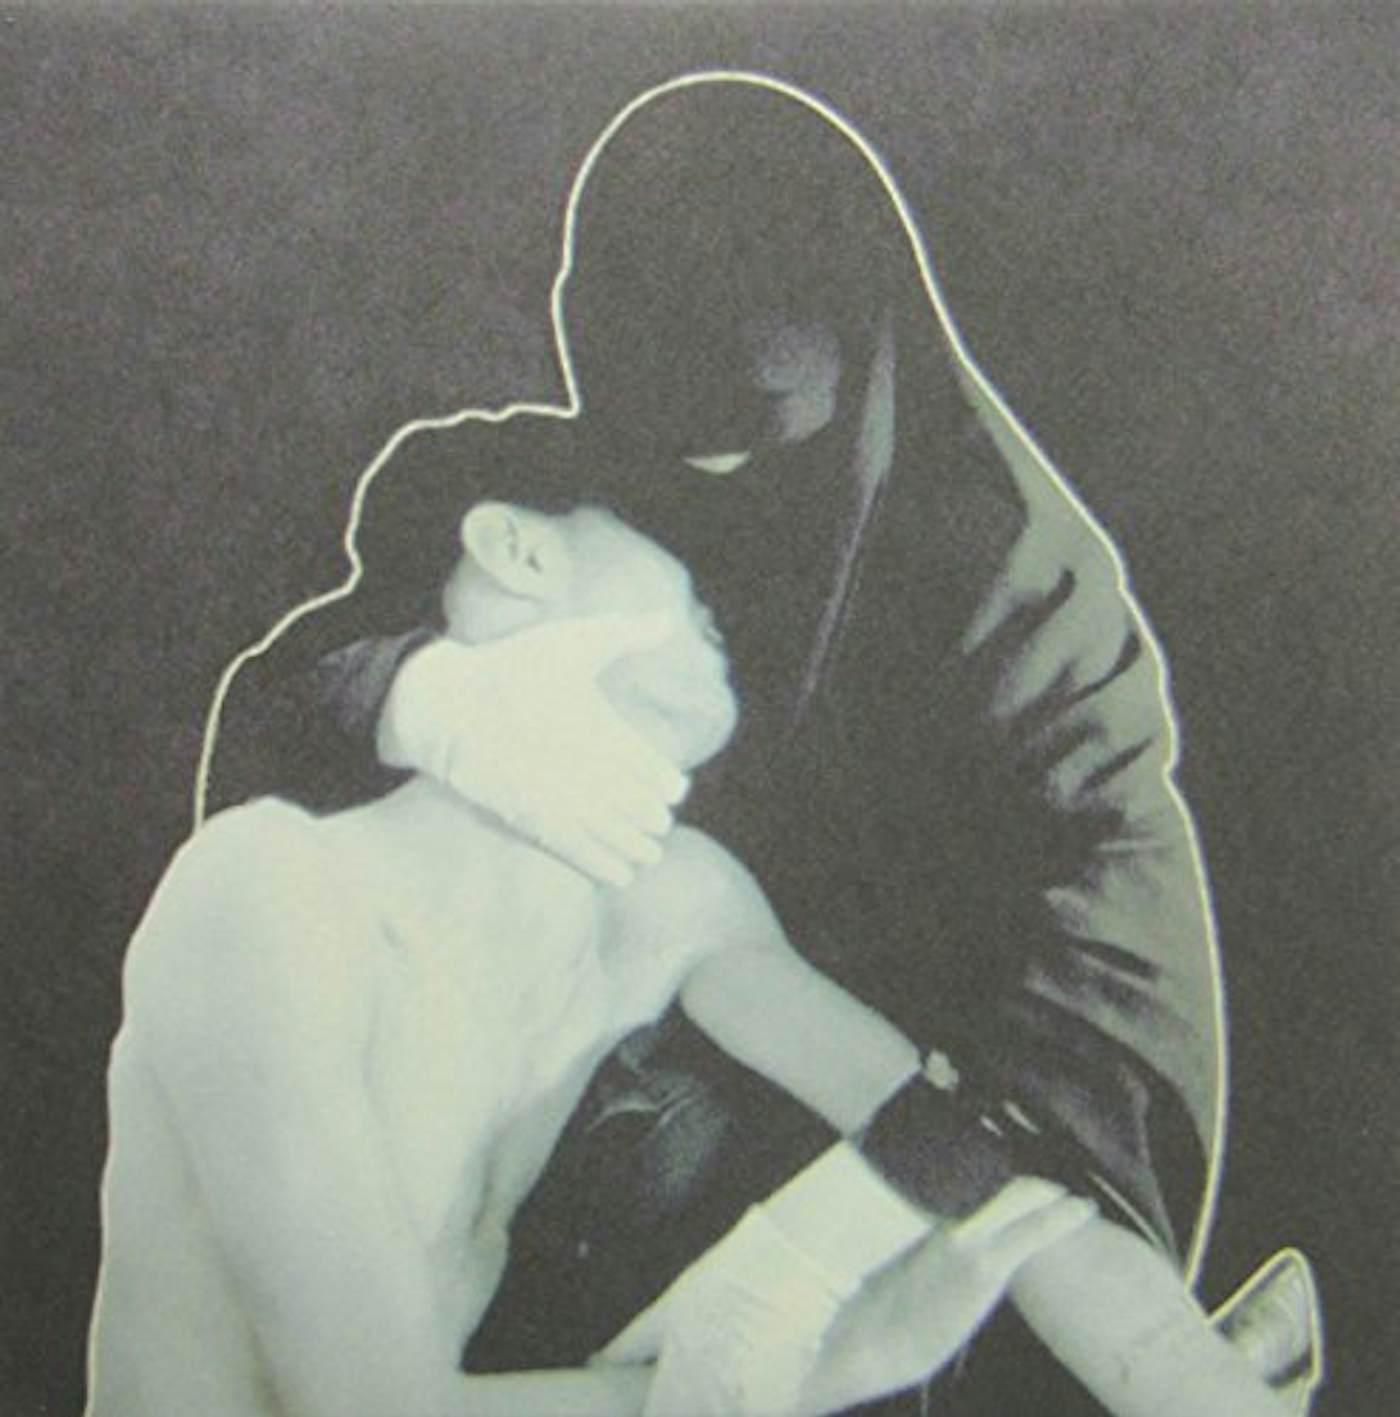 On Sale Crystal Castles III (CANADA ONLY) Vinyl Record $35.99$26.99